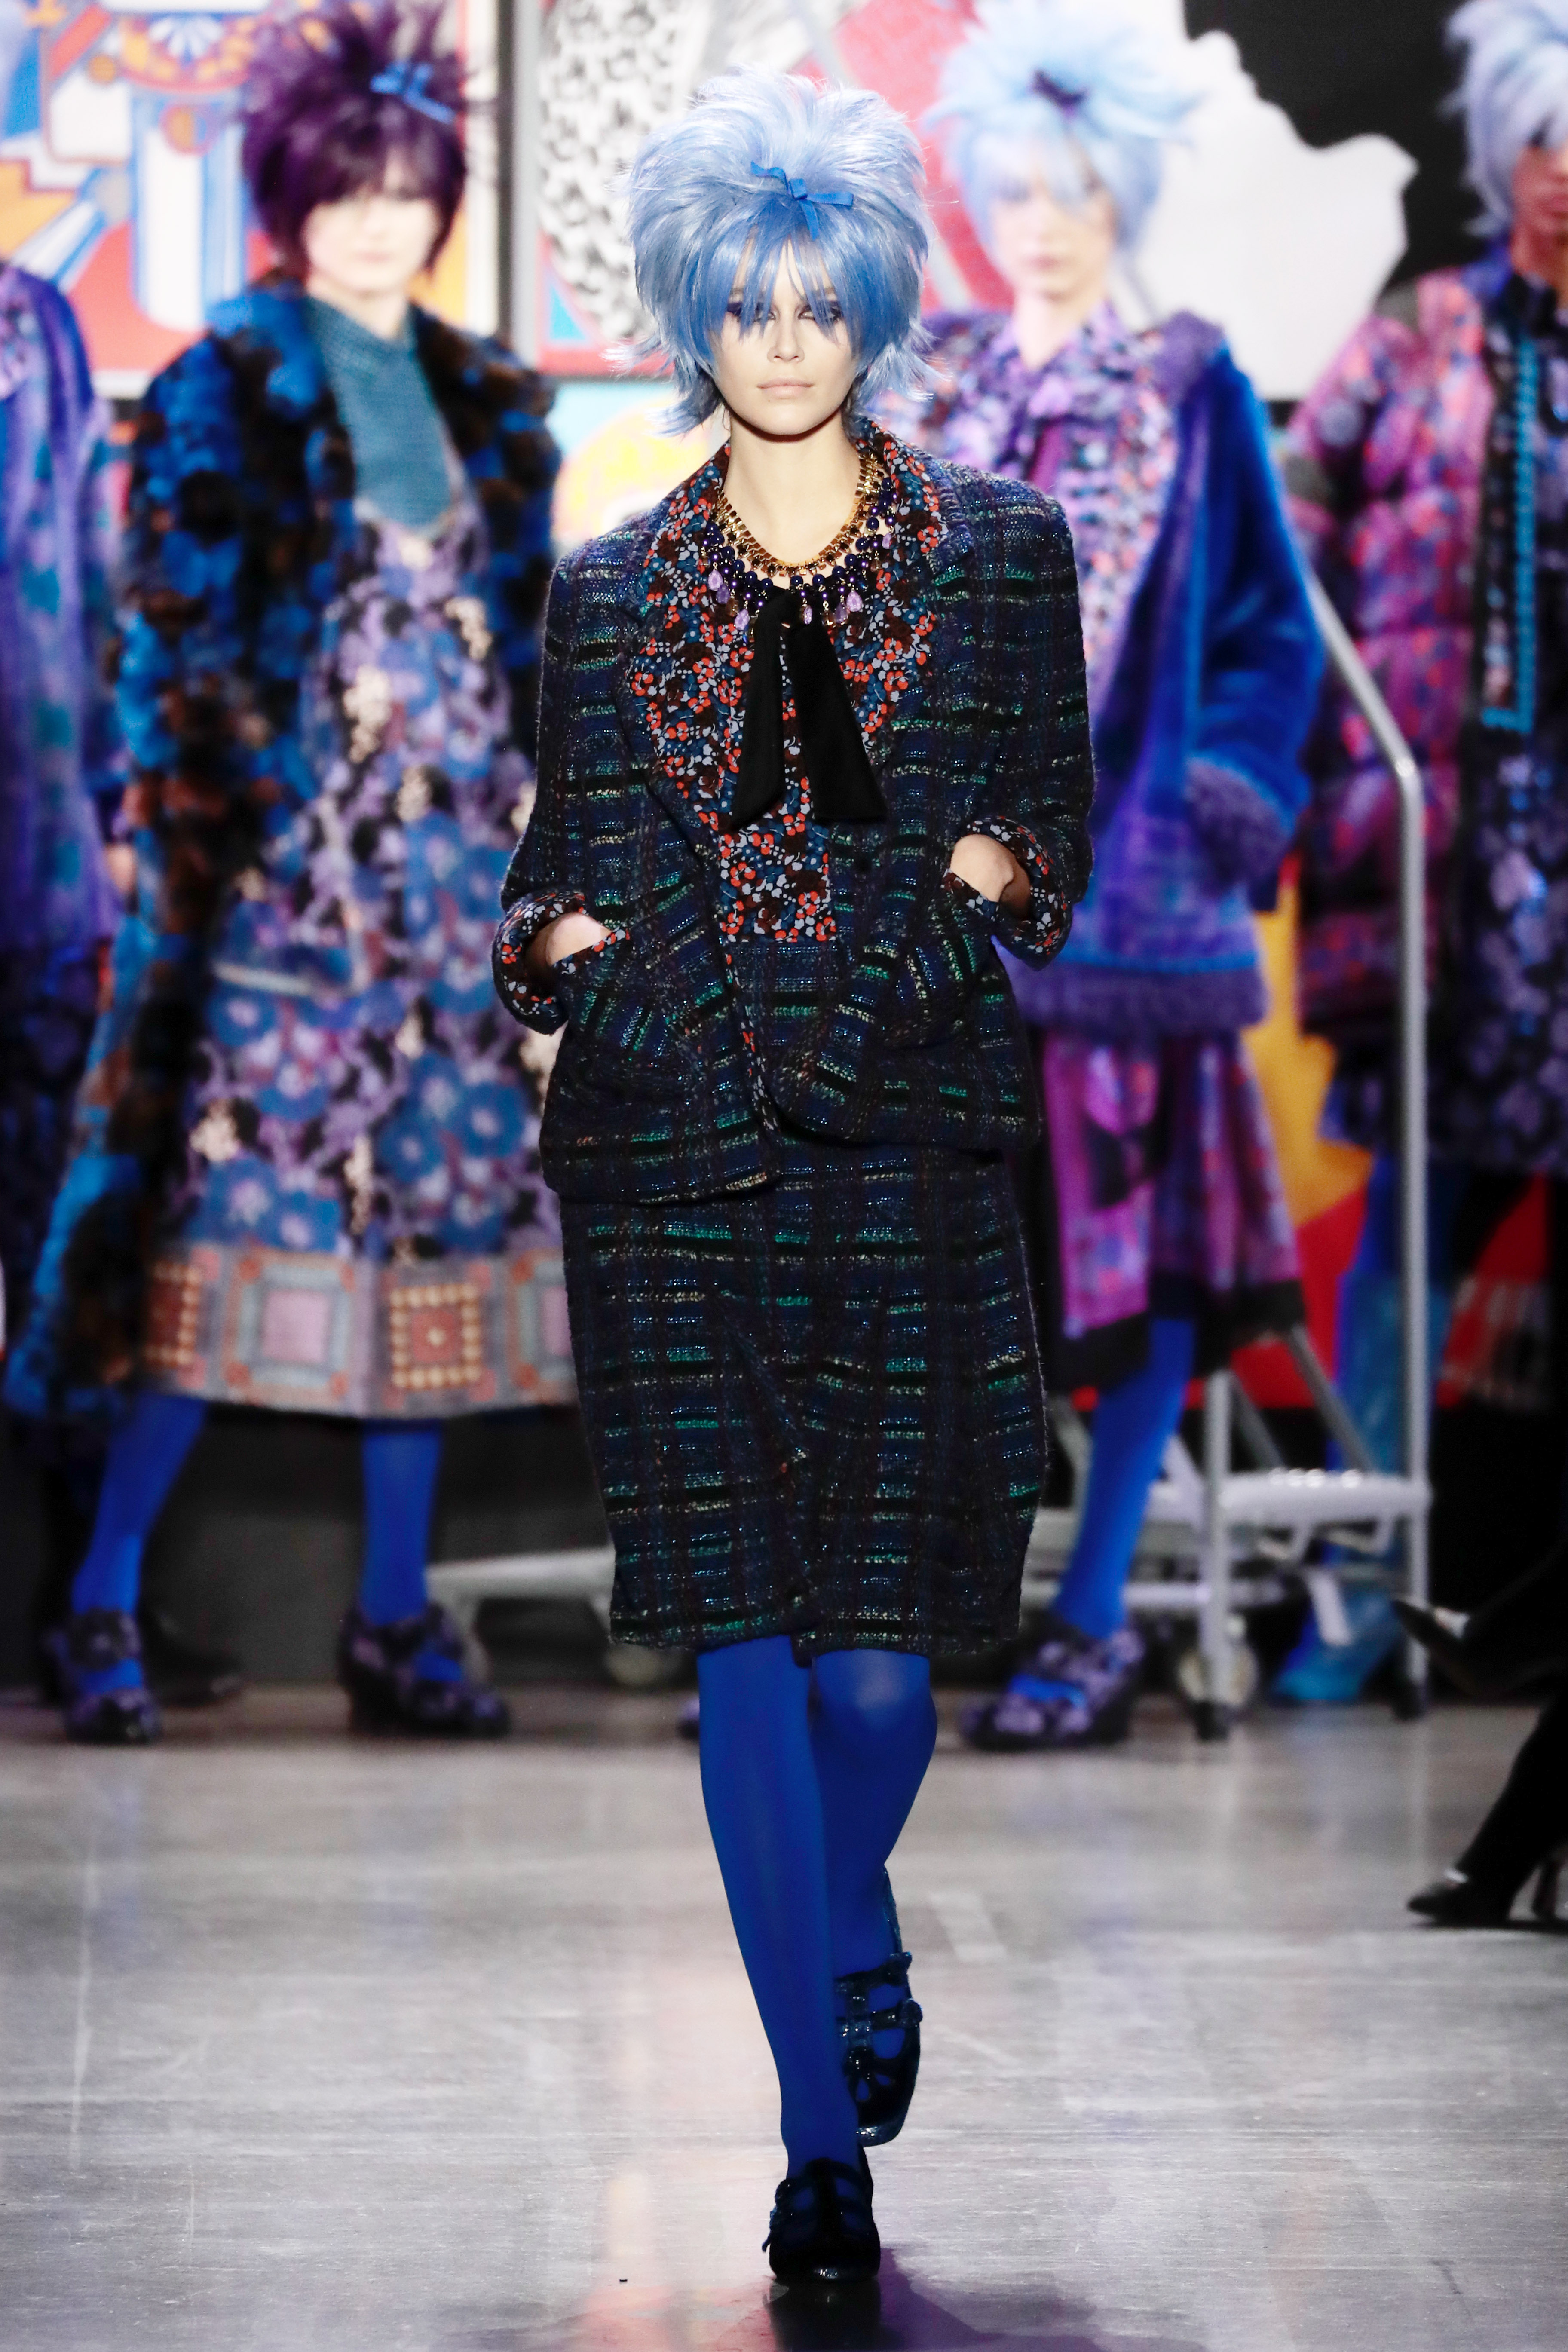 Anna Sui Fall 2019 is a Psychedelic Dream - V Magazine